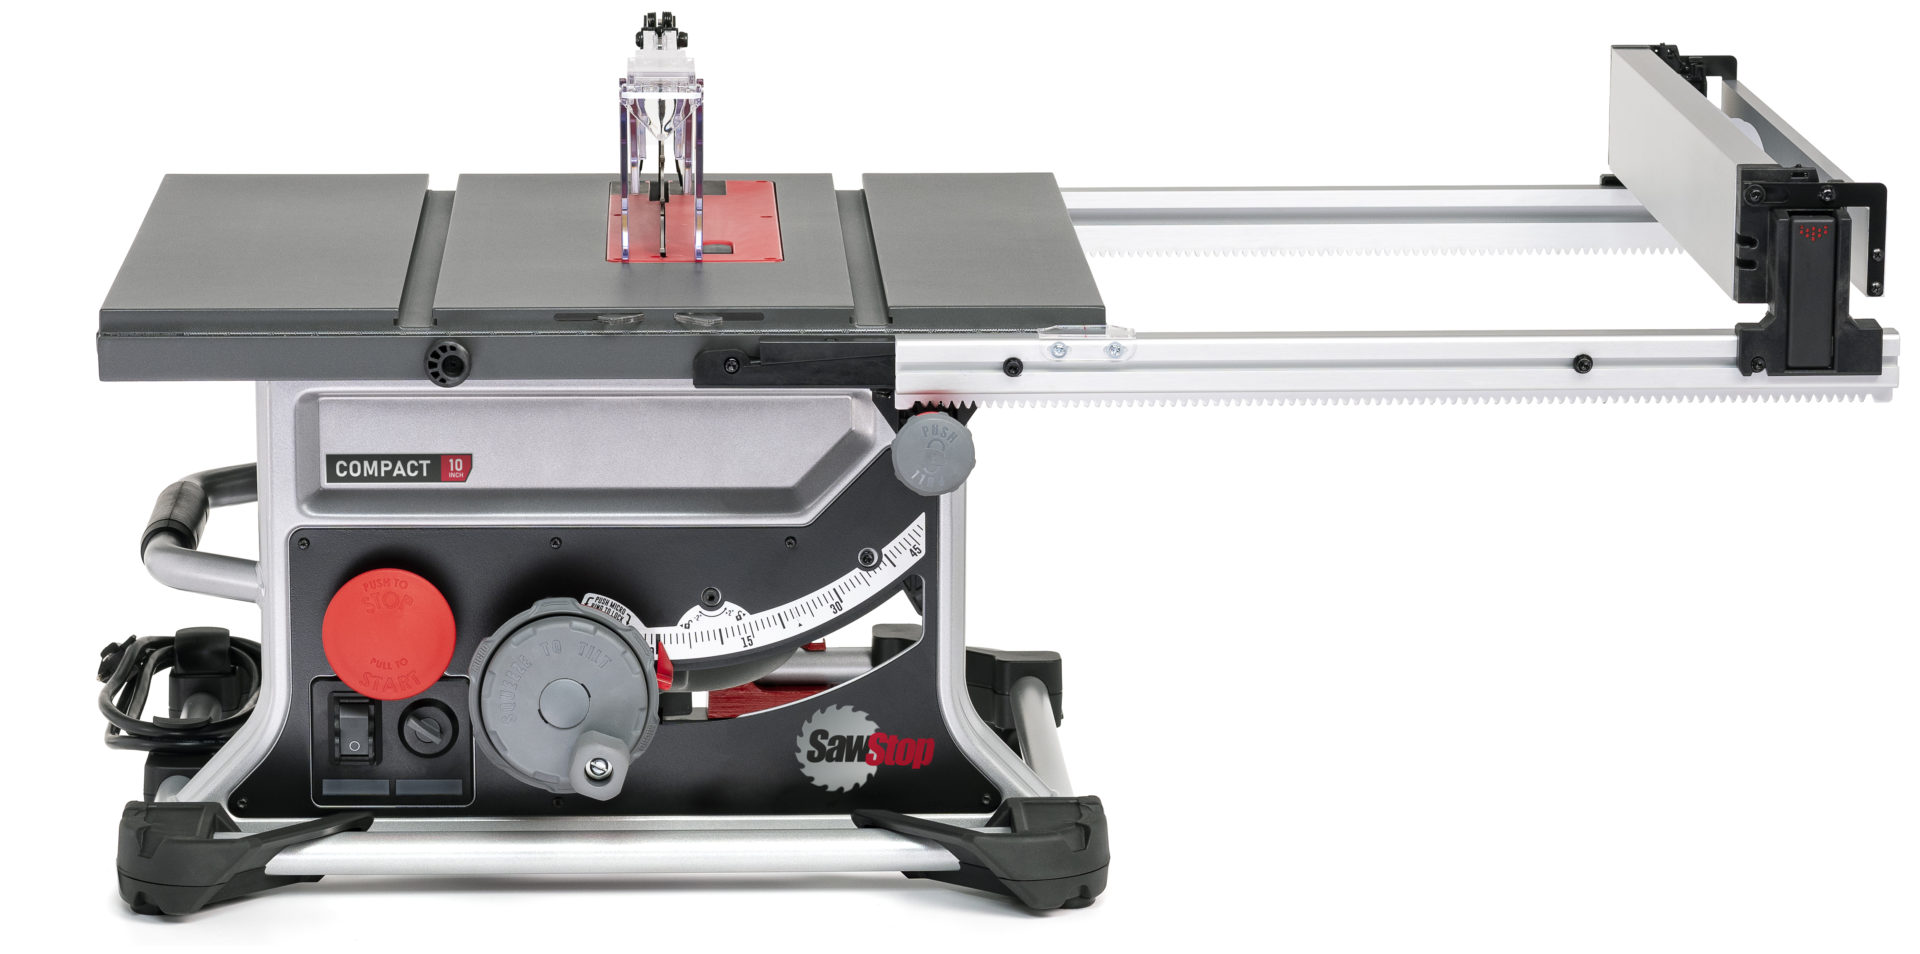 Sawstop Compact Table Saw Cts 120a60